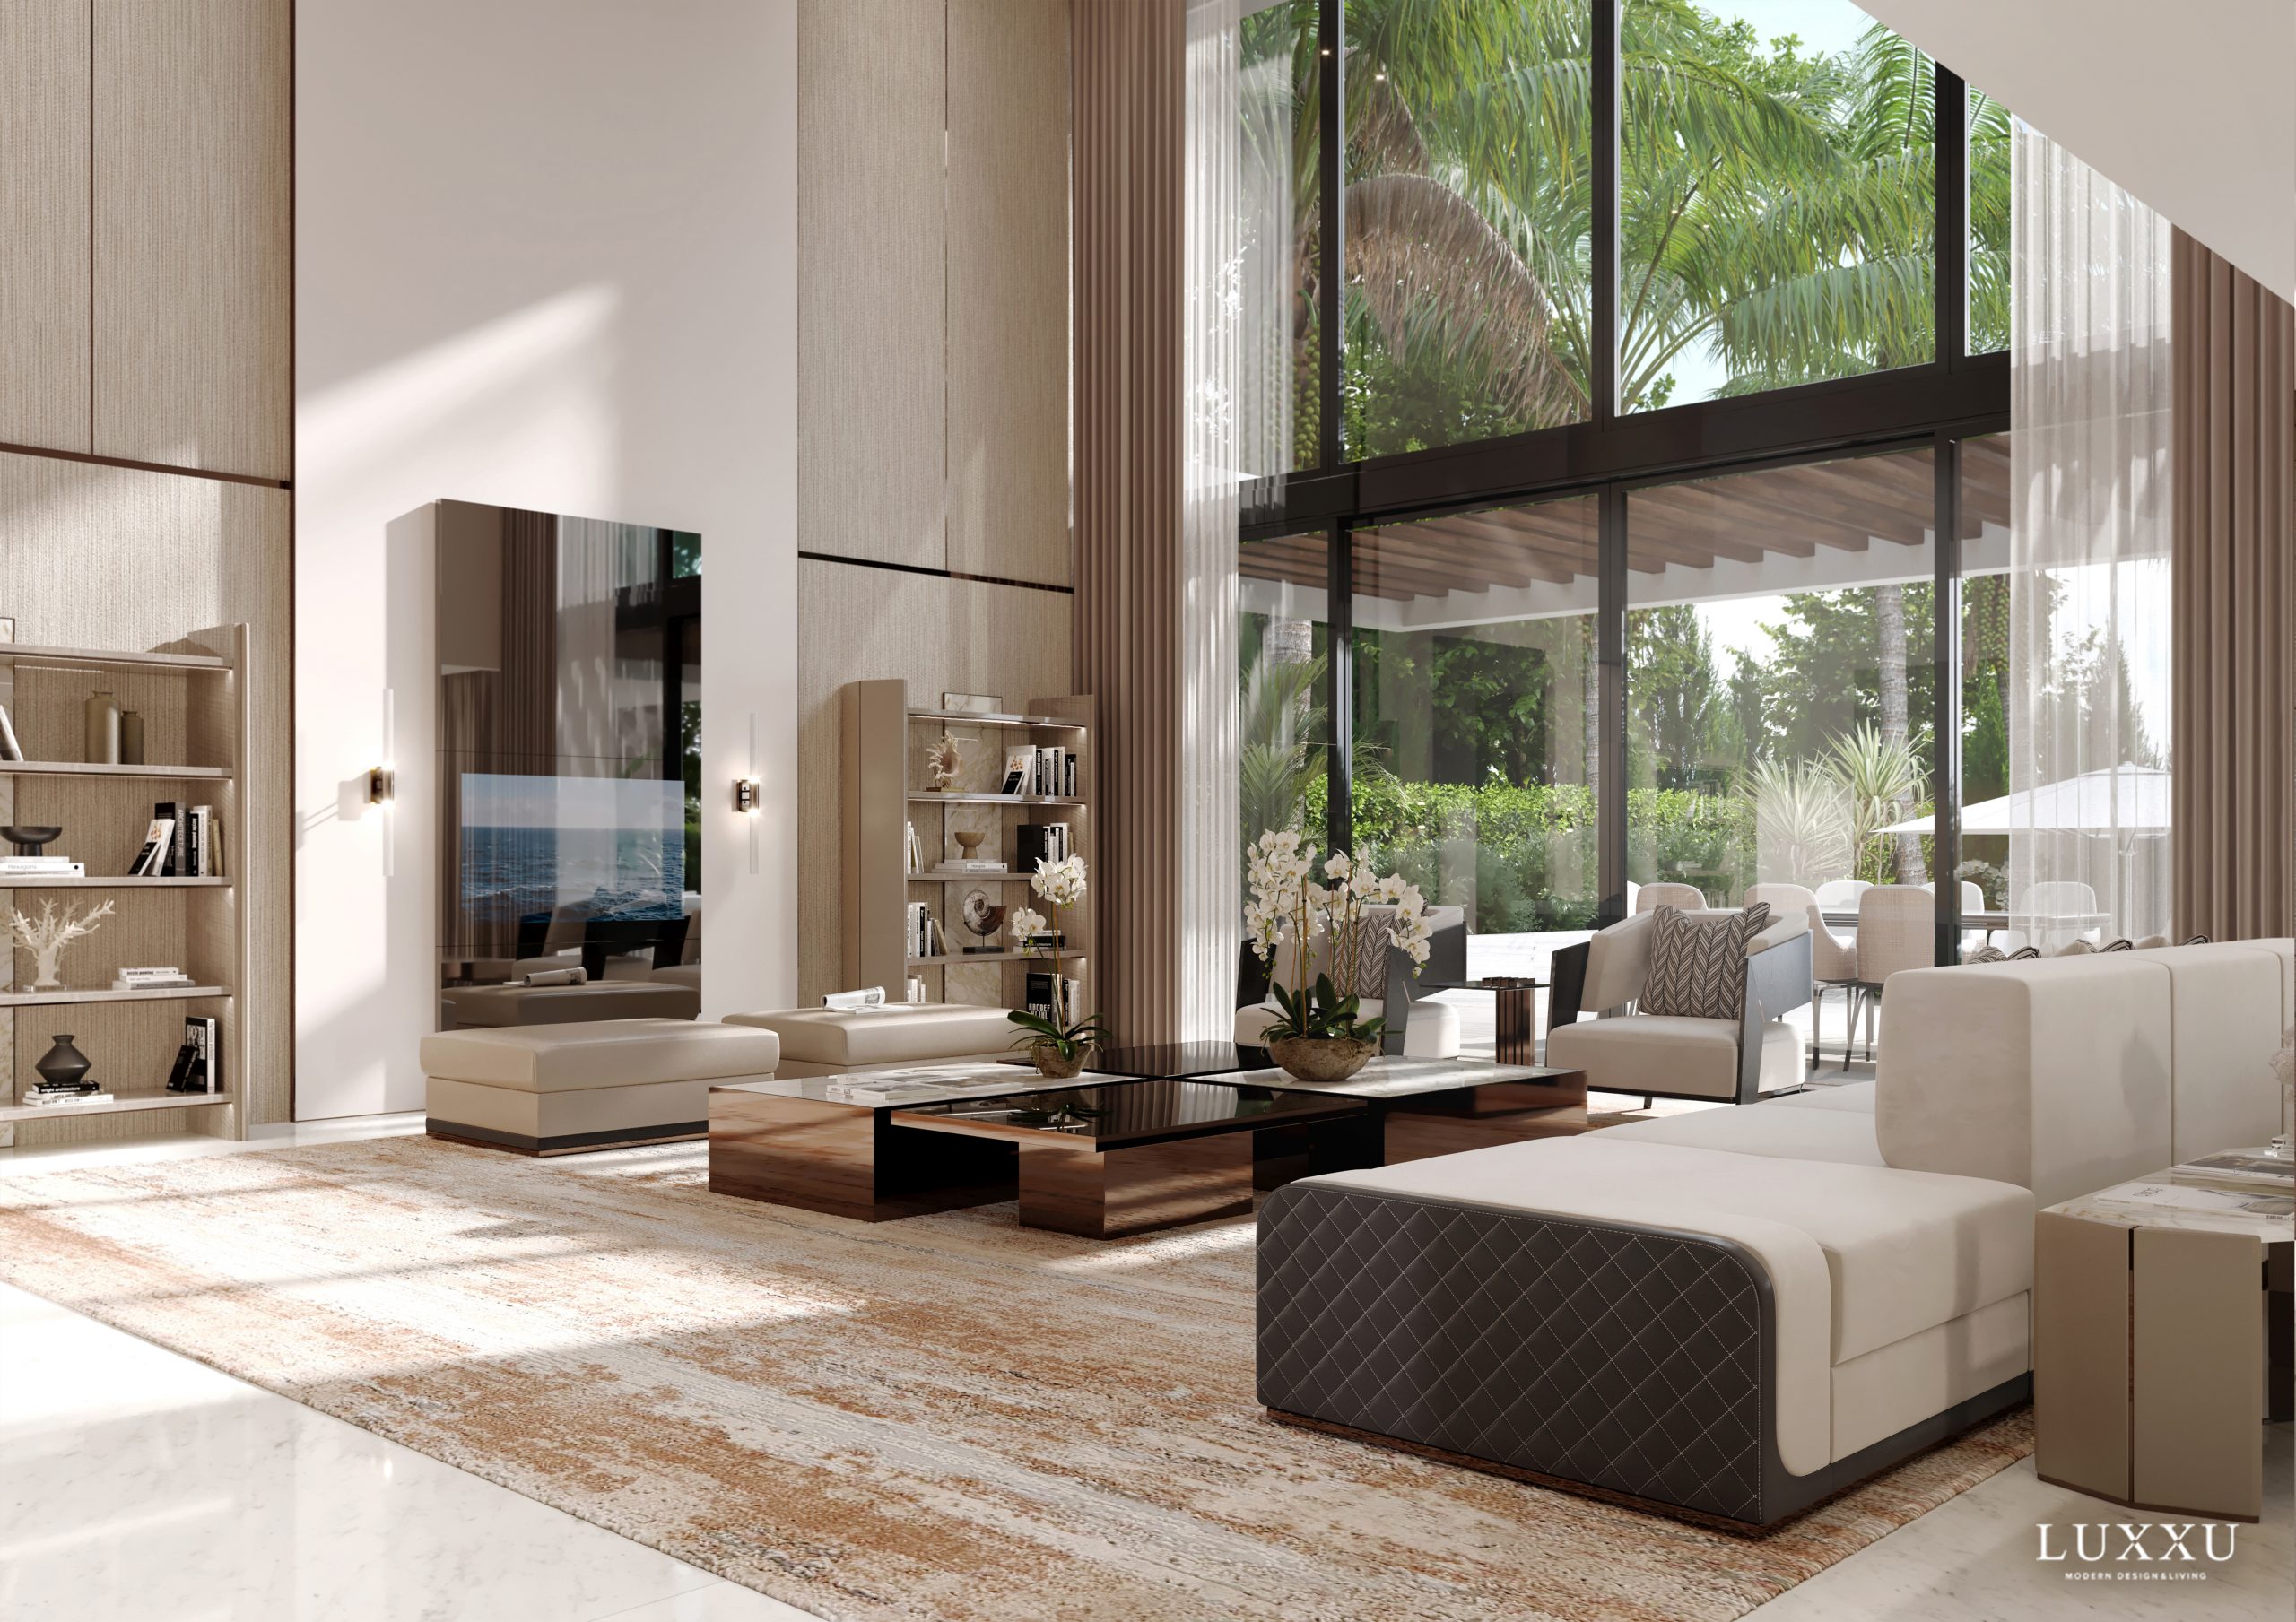 Luxury Rooms: Welcome To A Luxurious Way Of Living